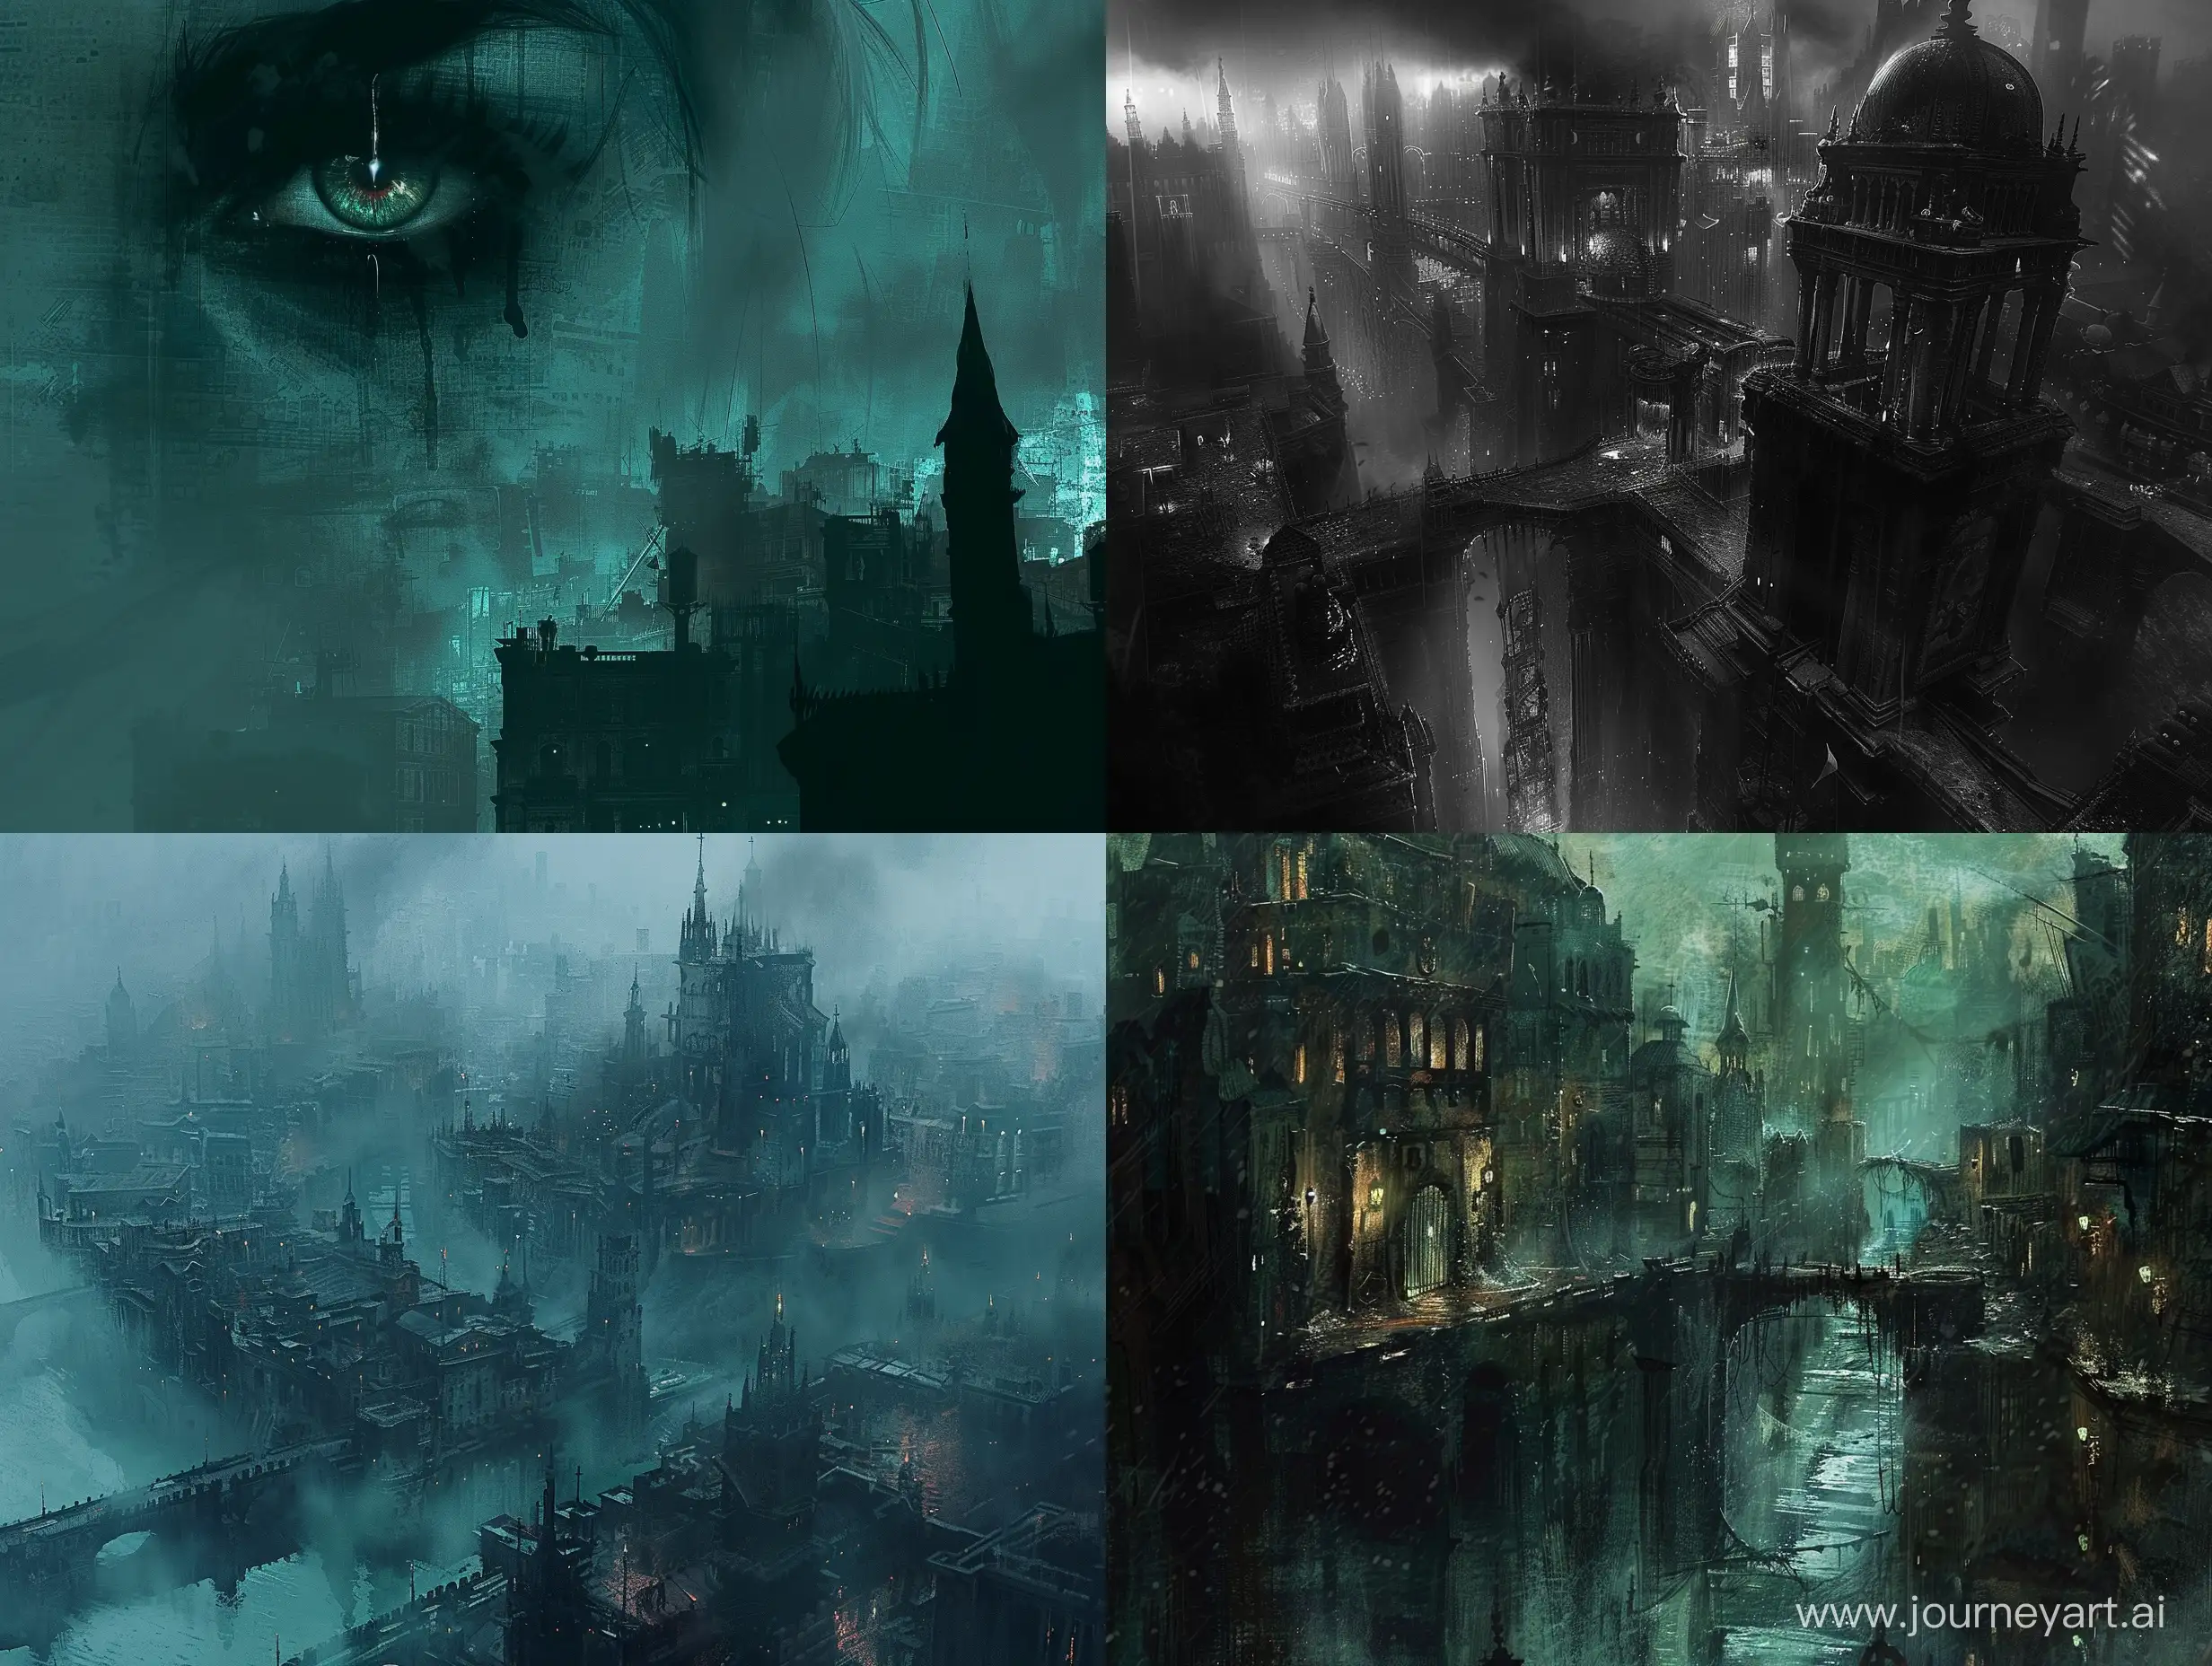 Tears-and-Intrigues-in-a-Dark-Fantasy-Cityscape